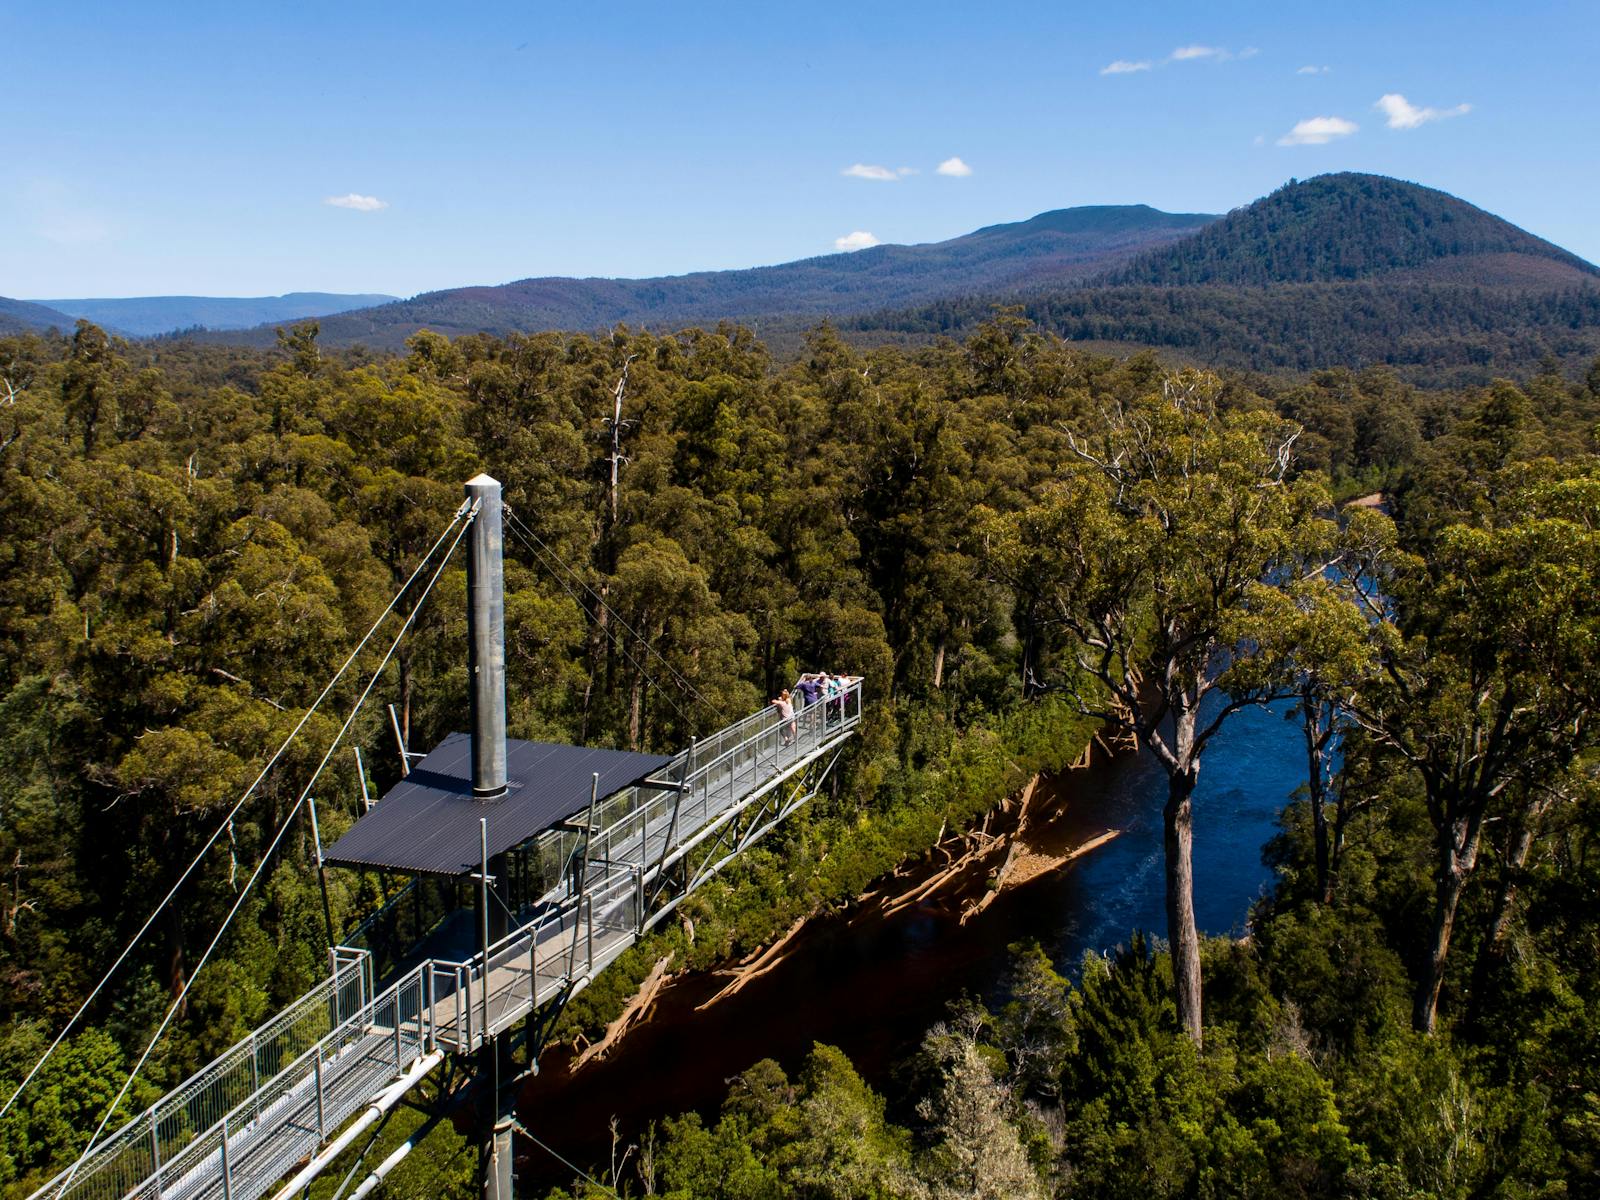 Airwalk cantilever is 50 metres above the riverbank and is 600 metres long